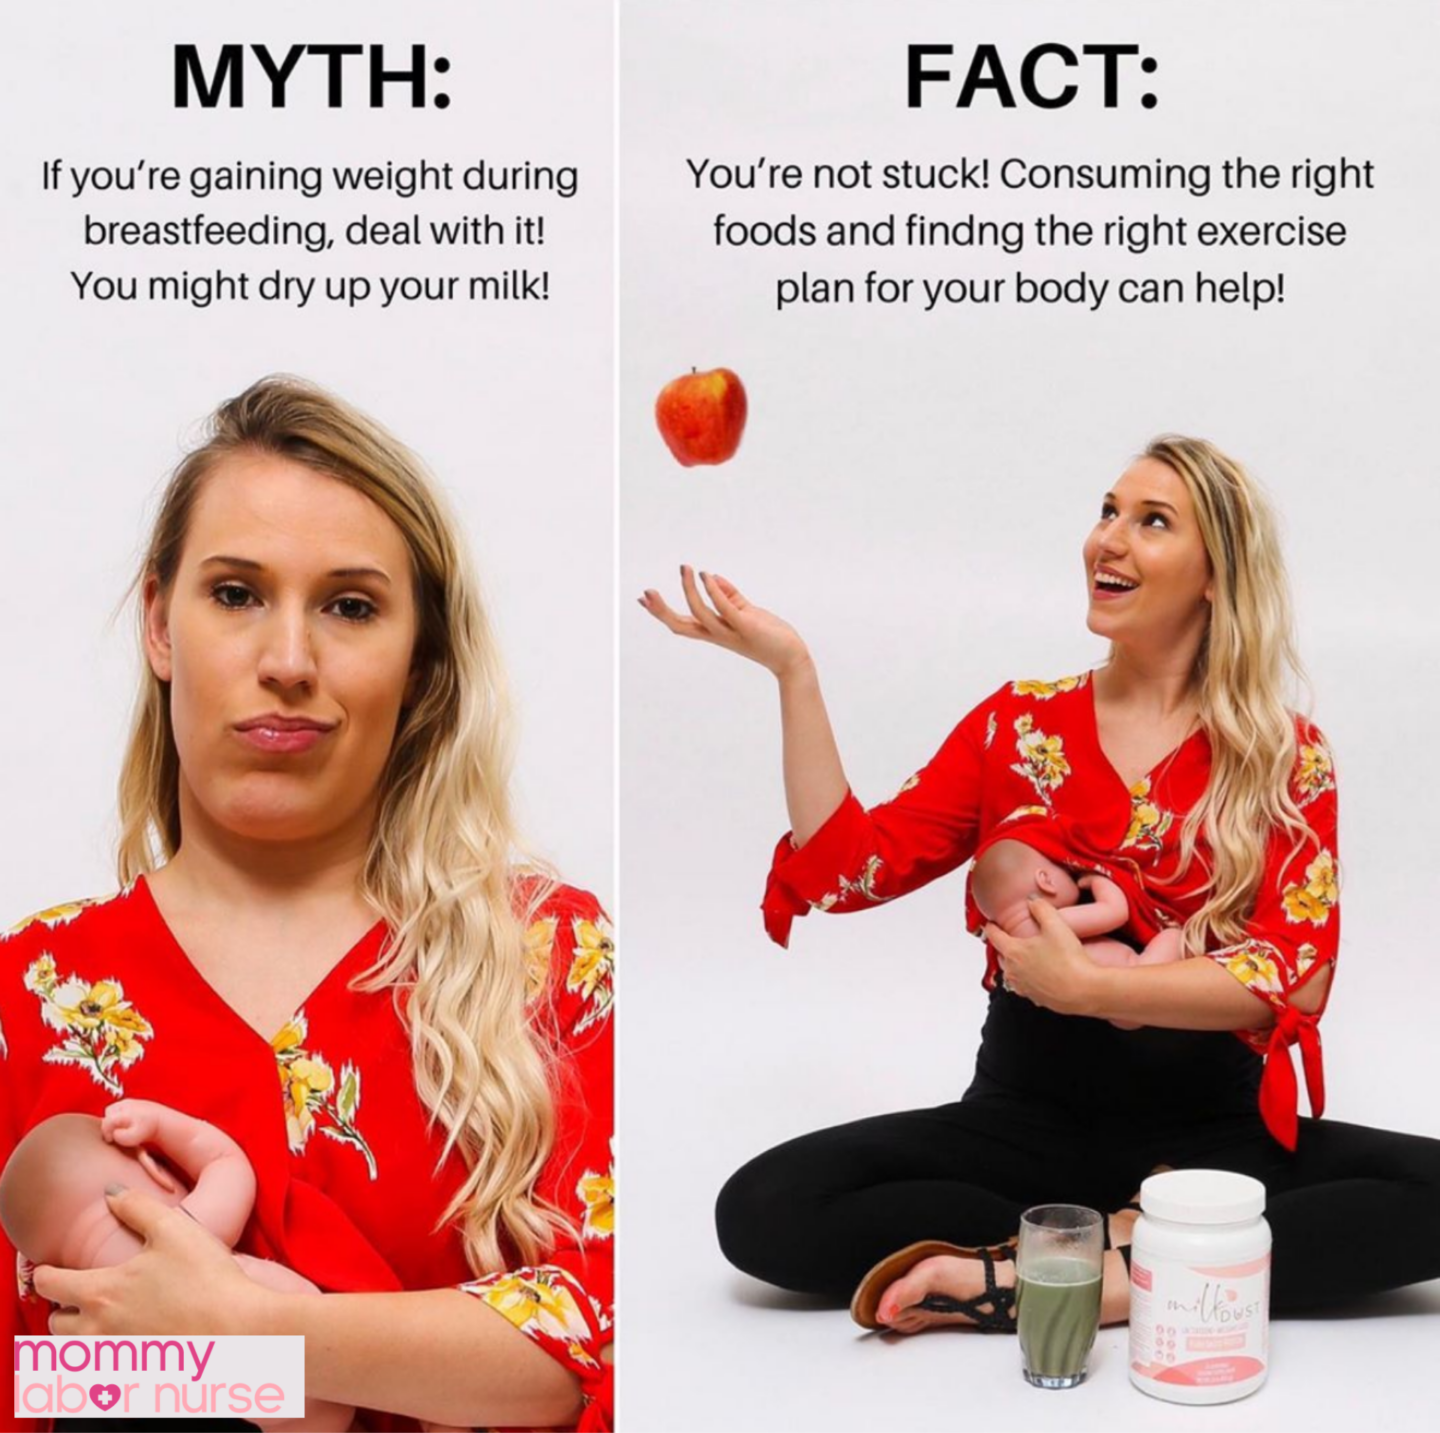 myth vs fact about losing weight while breastfeeding